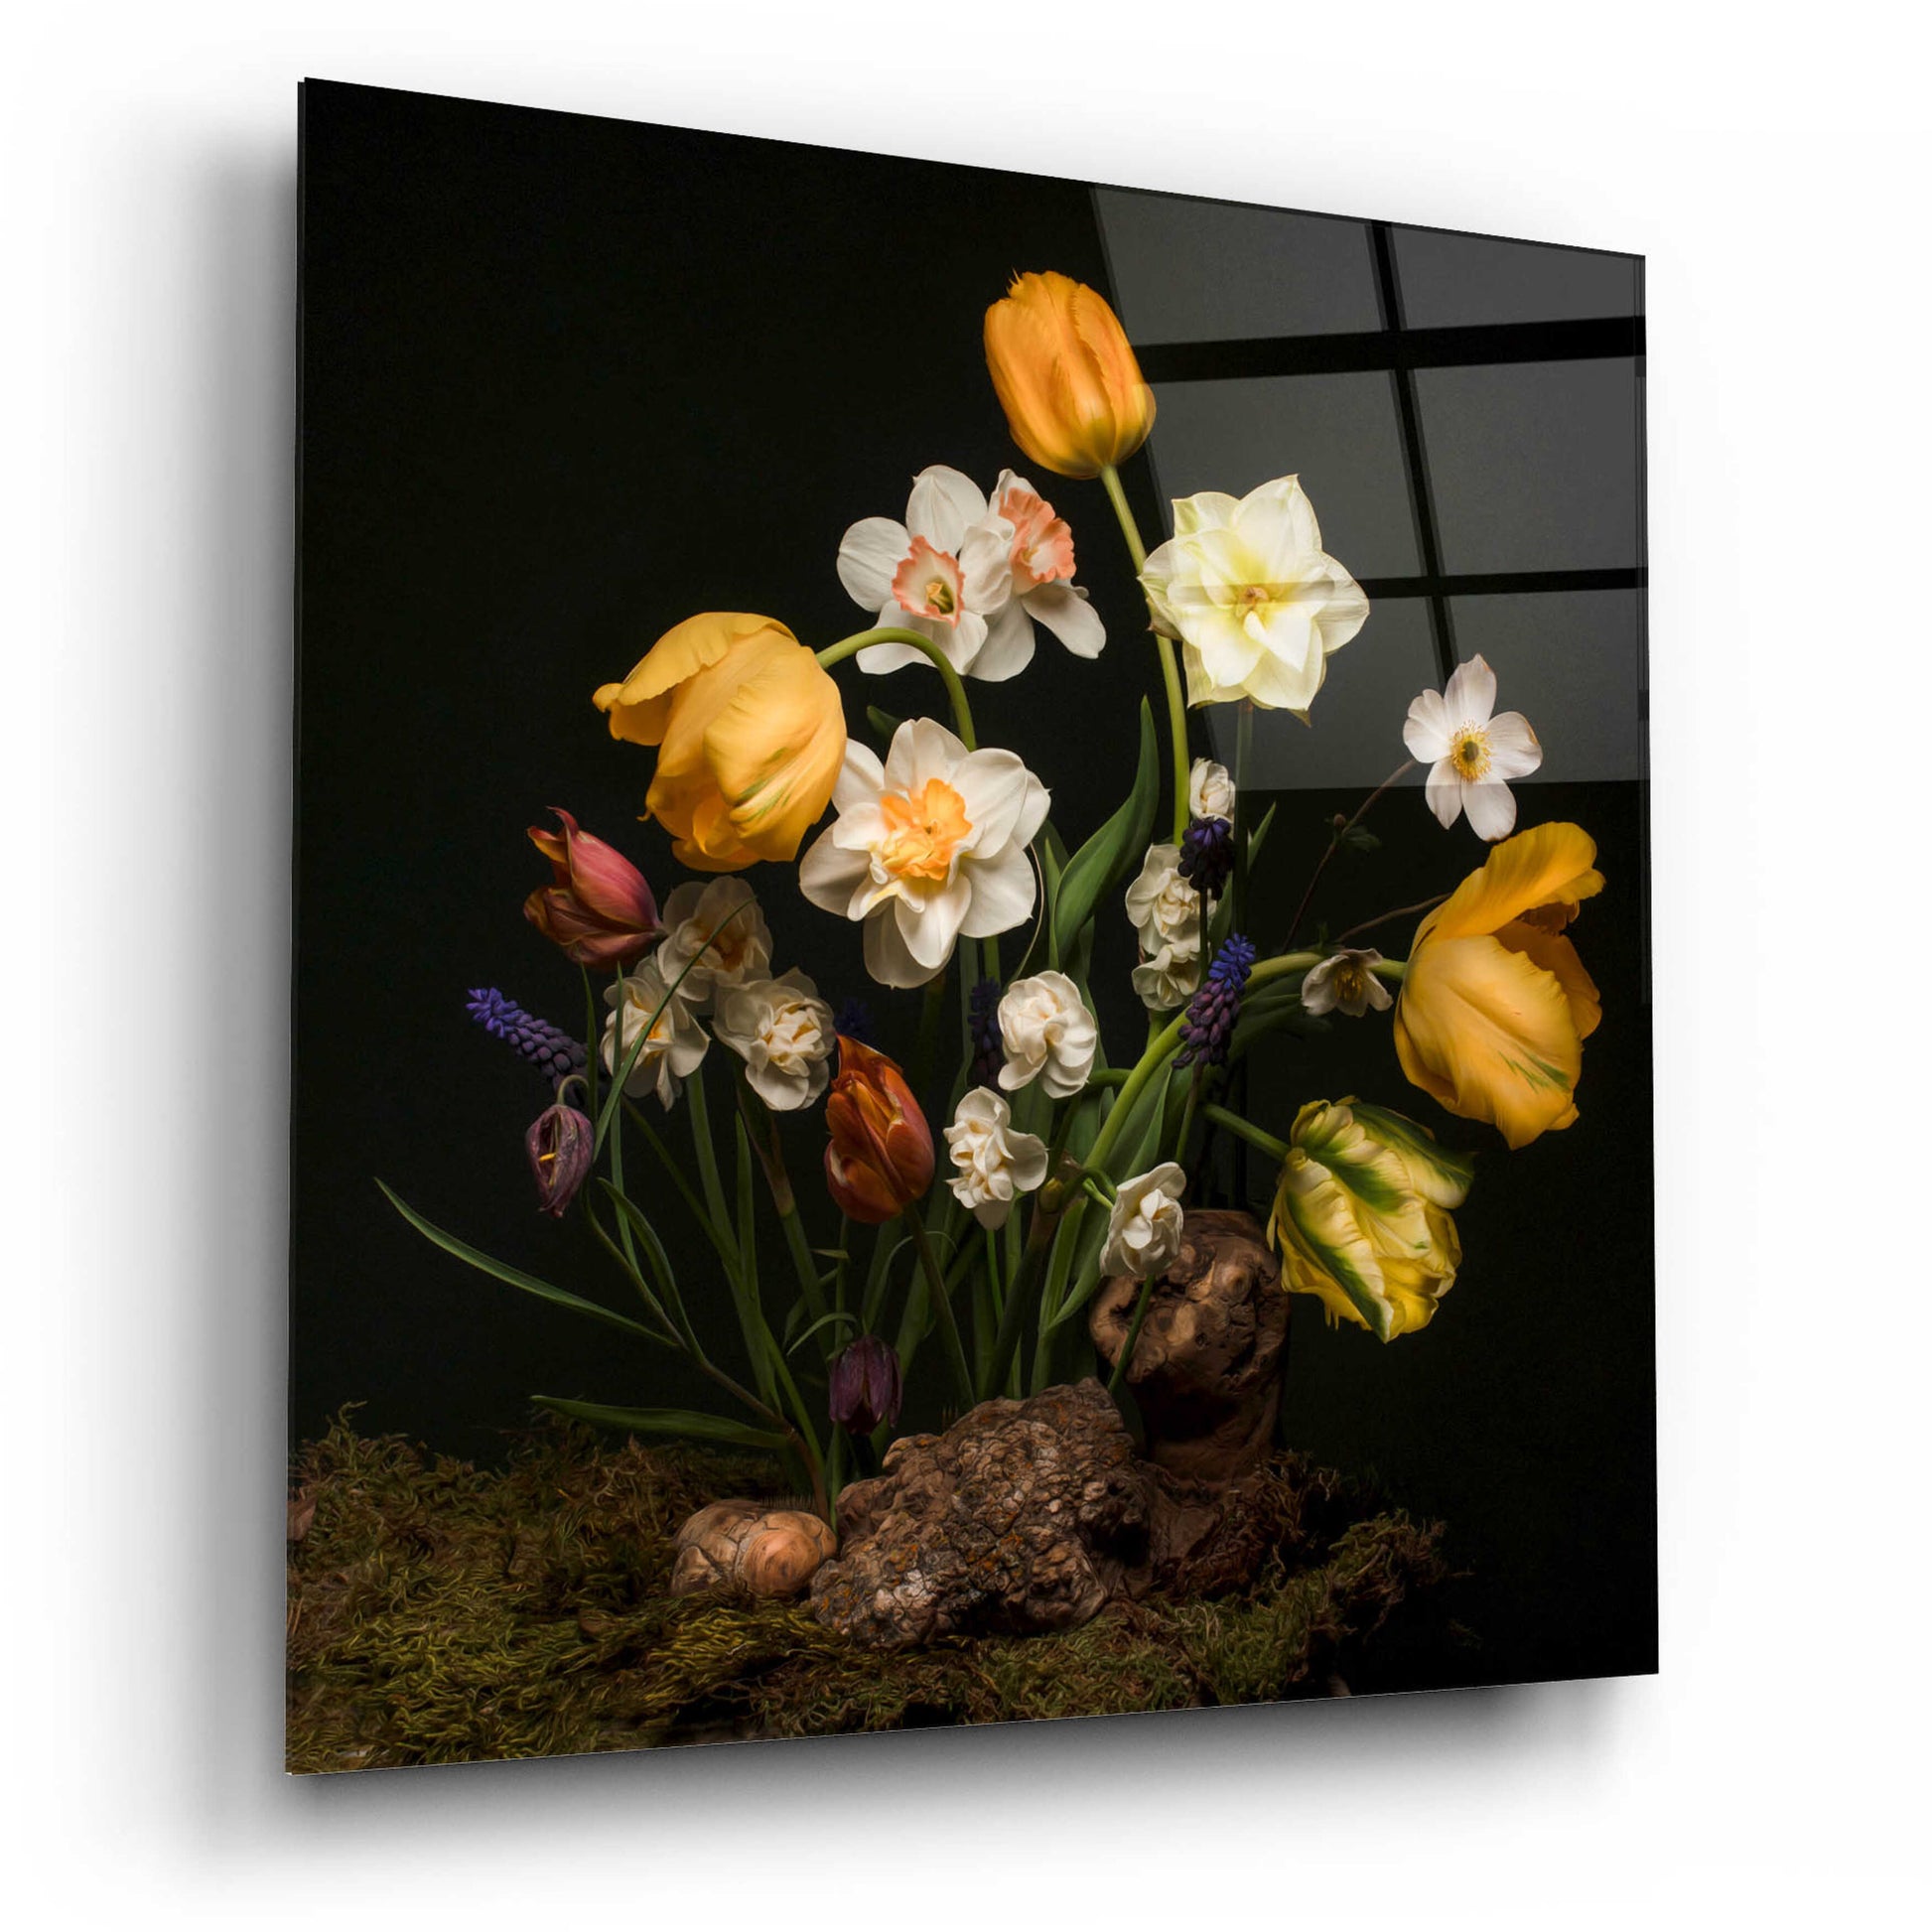 Epic Art 'An Ode to Spring' by Leah McLean, Acrylic Glass Wall Art,12x12